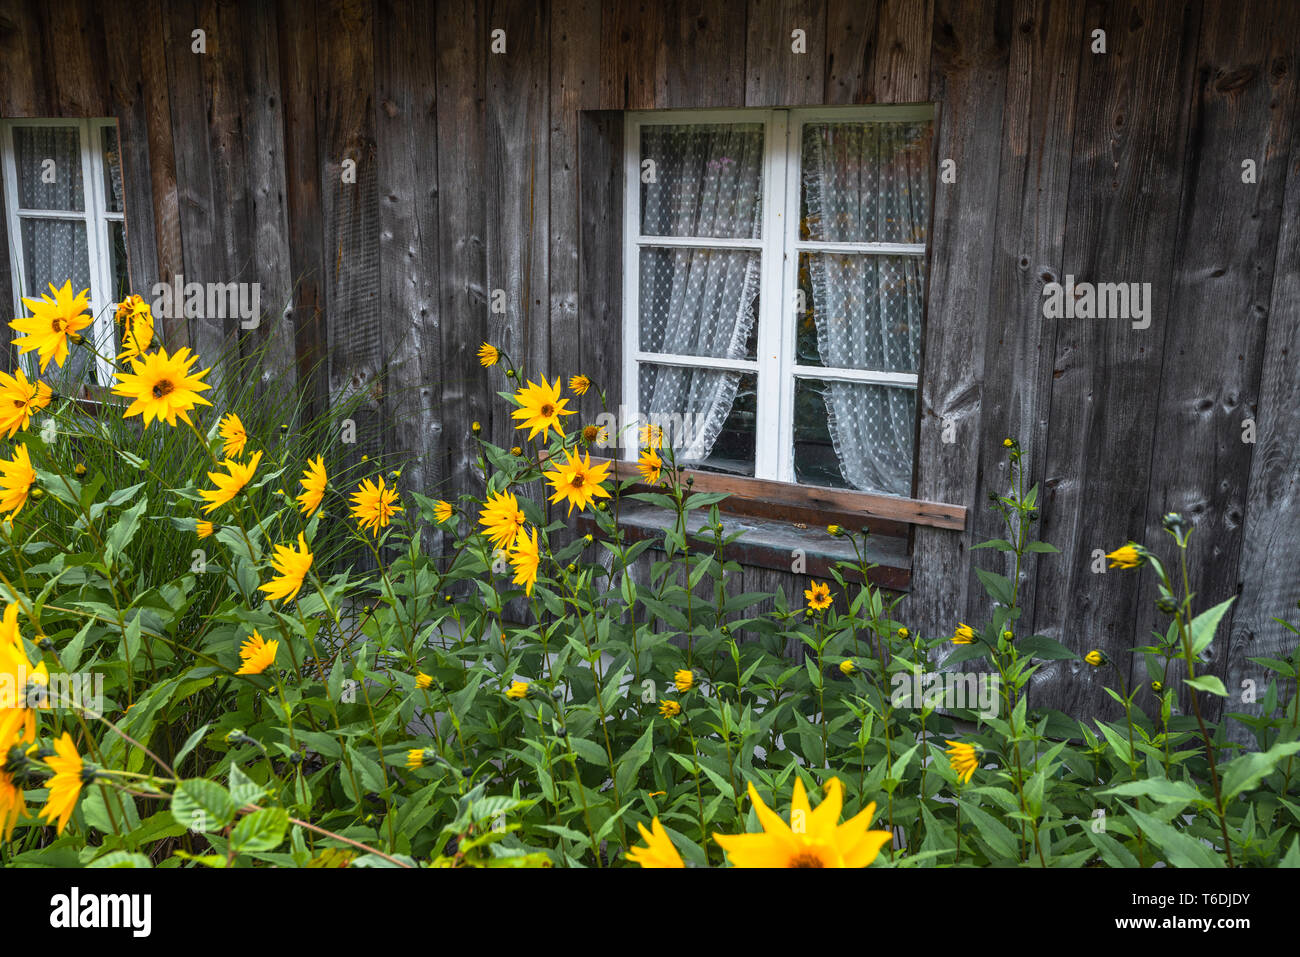 blooming aster flowers in front of a lattice window, Black Forest house in  Menzenschwand, Germany, countryhouse with wooden house front Stock Photo